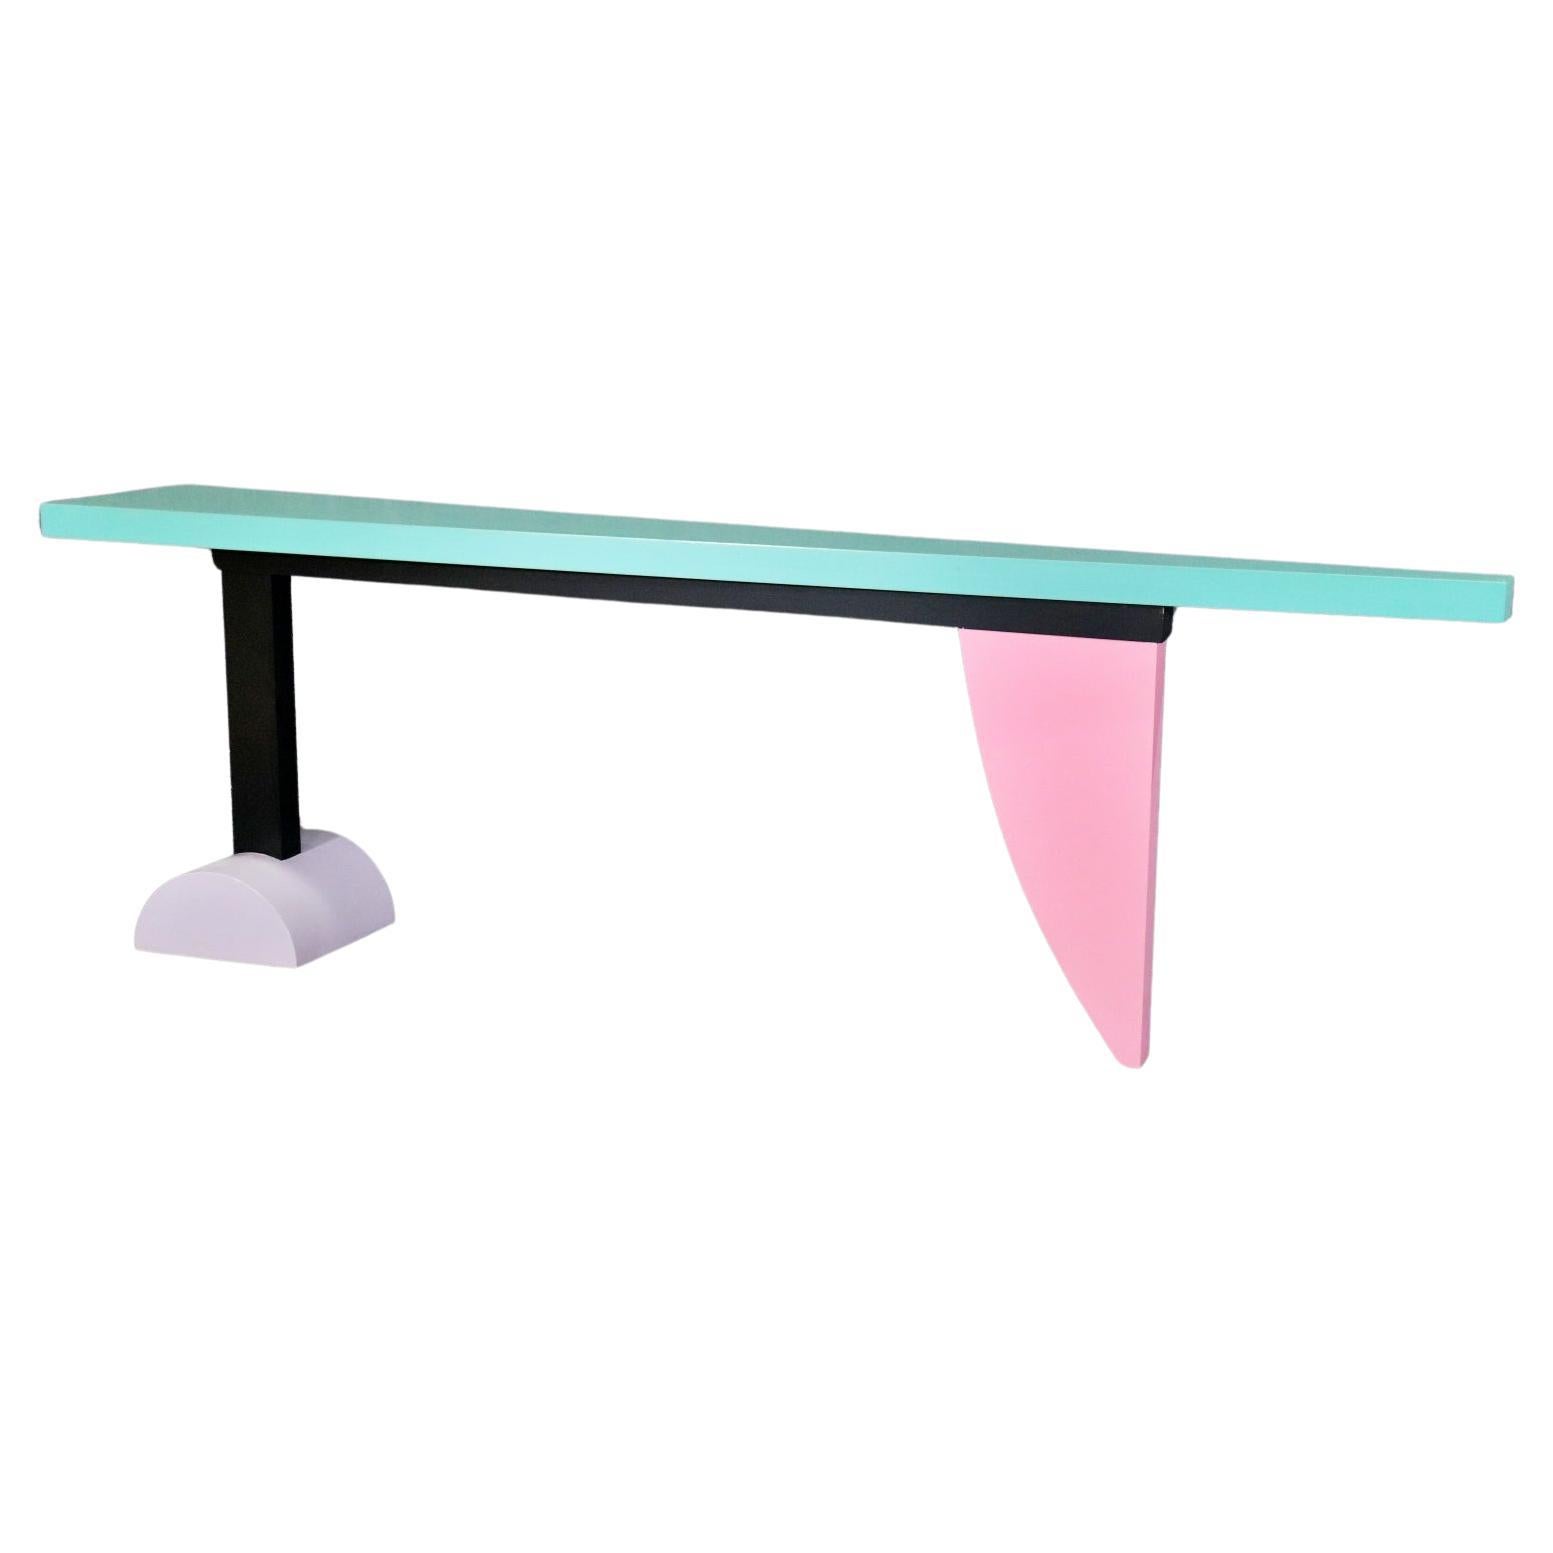 Memphis Style Polychromed painted Console Table Attributed to Peter Shire For Sale